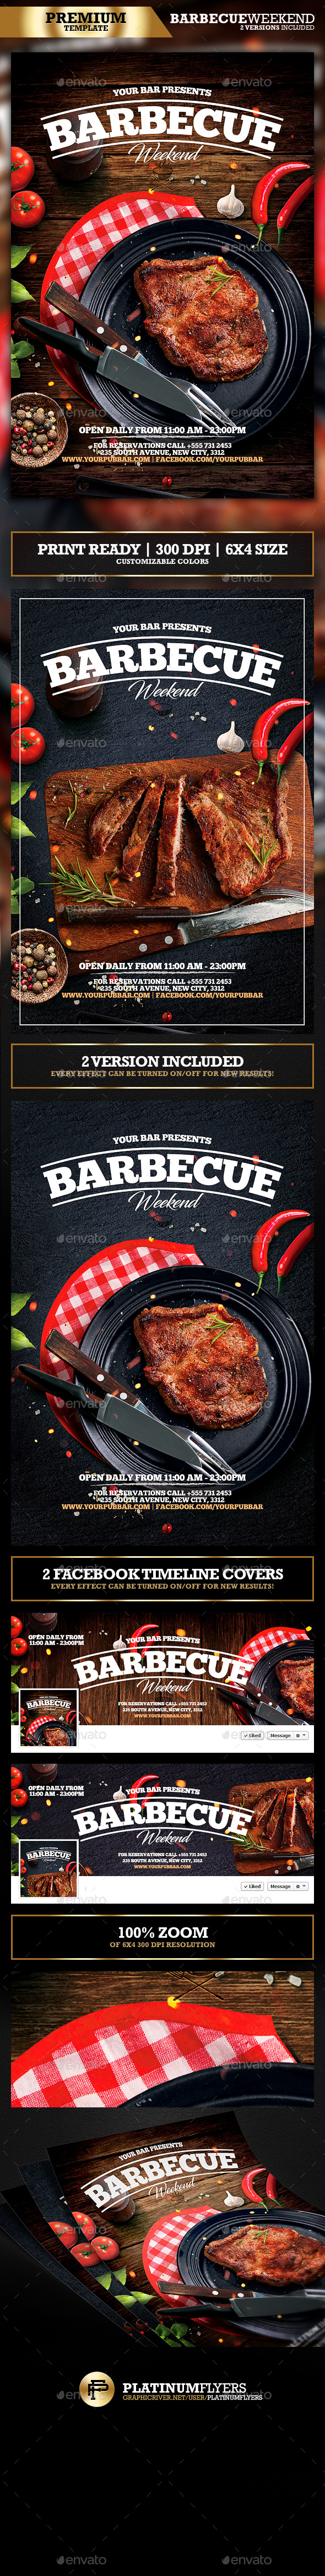 Barbecue BBQ Restaurant Promotion Flyer